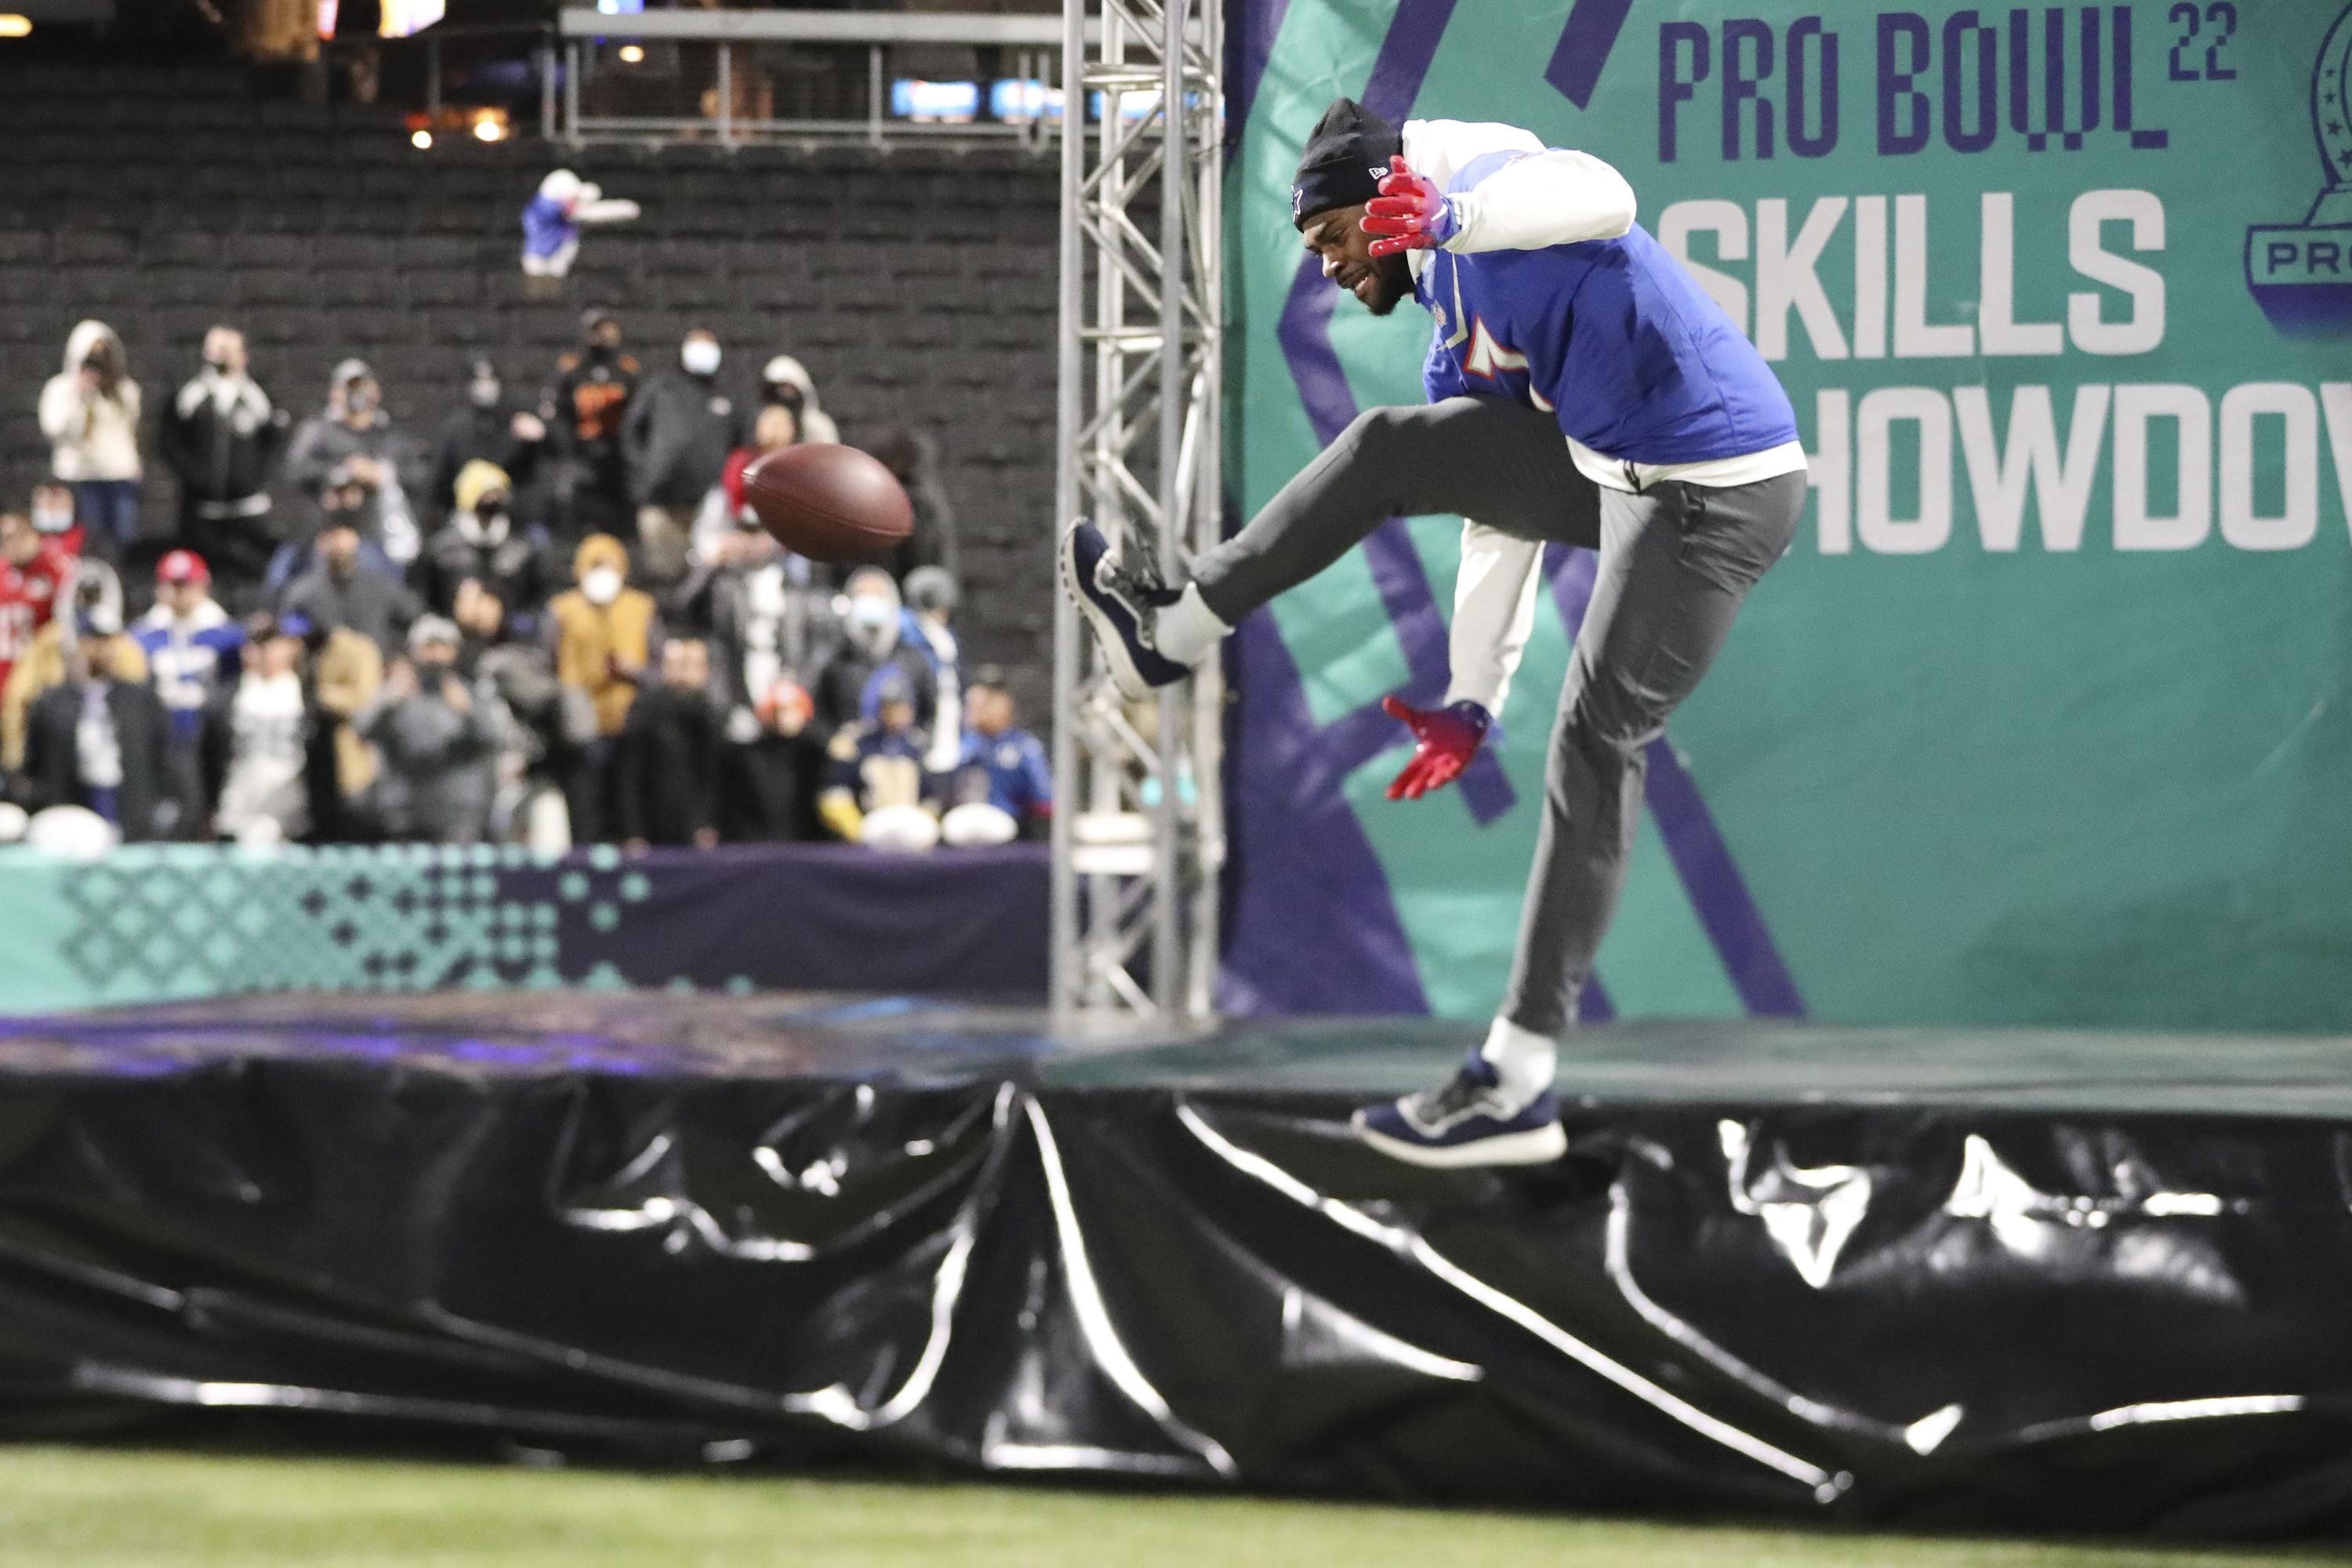 NFL Pro Bowl skills competitions announced AP News